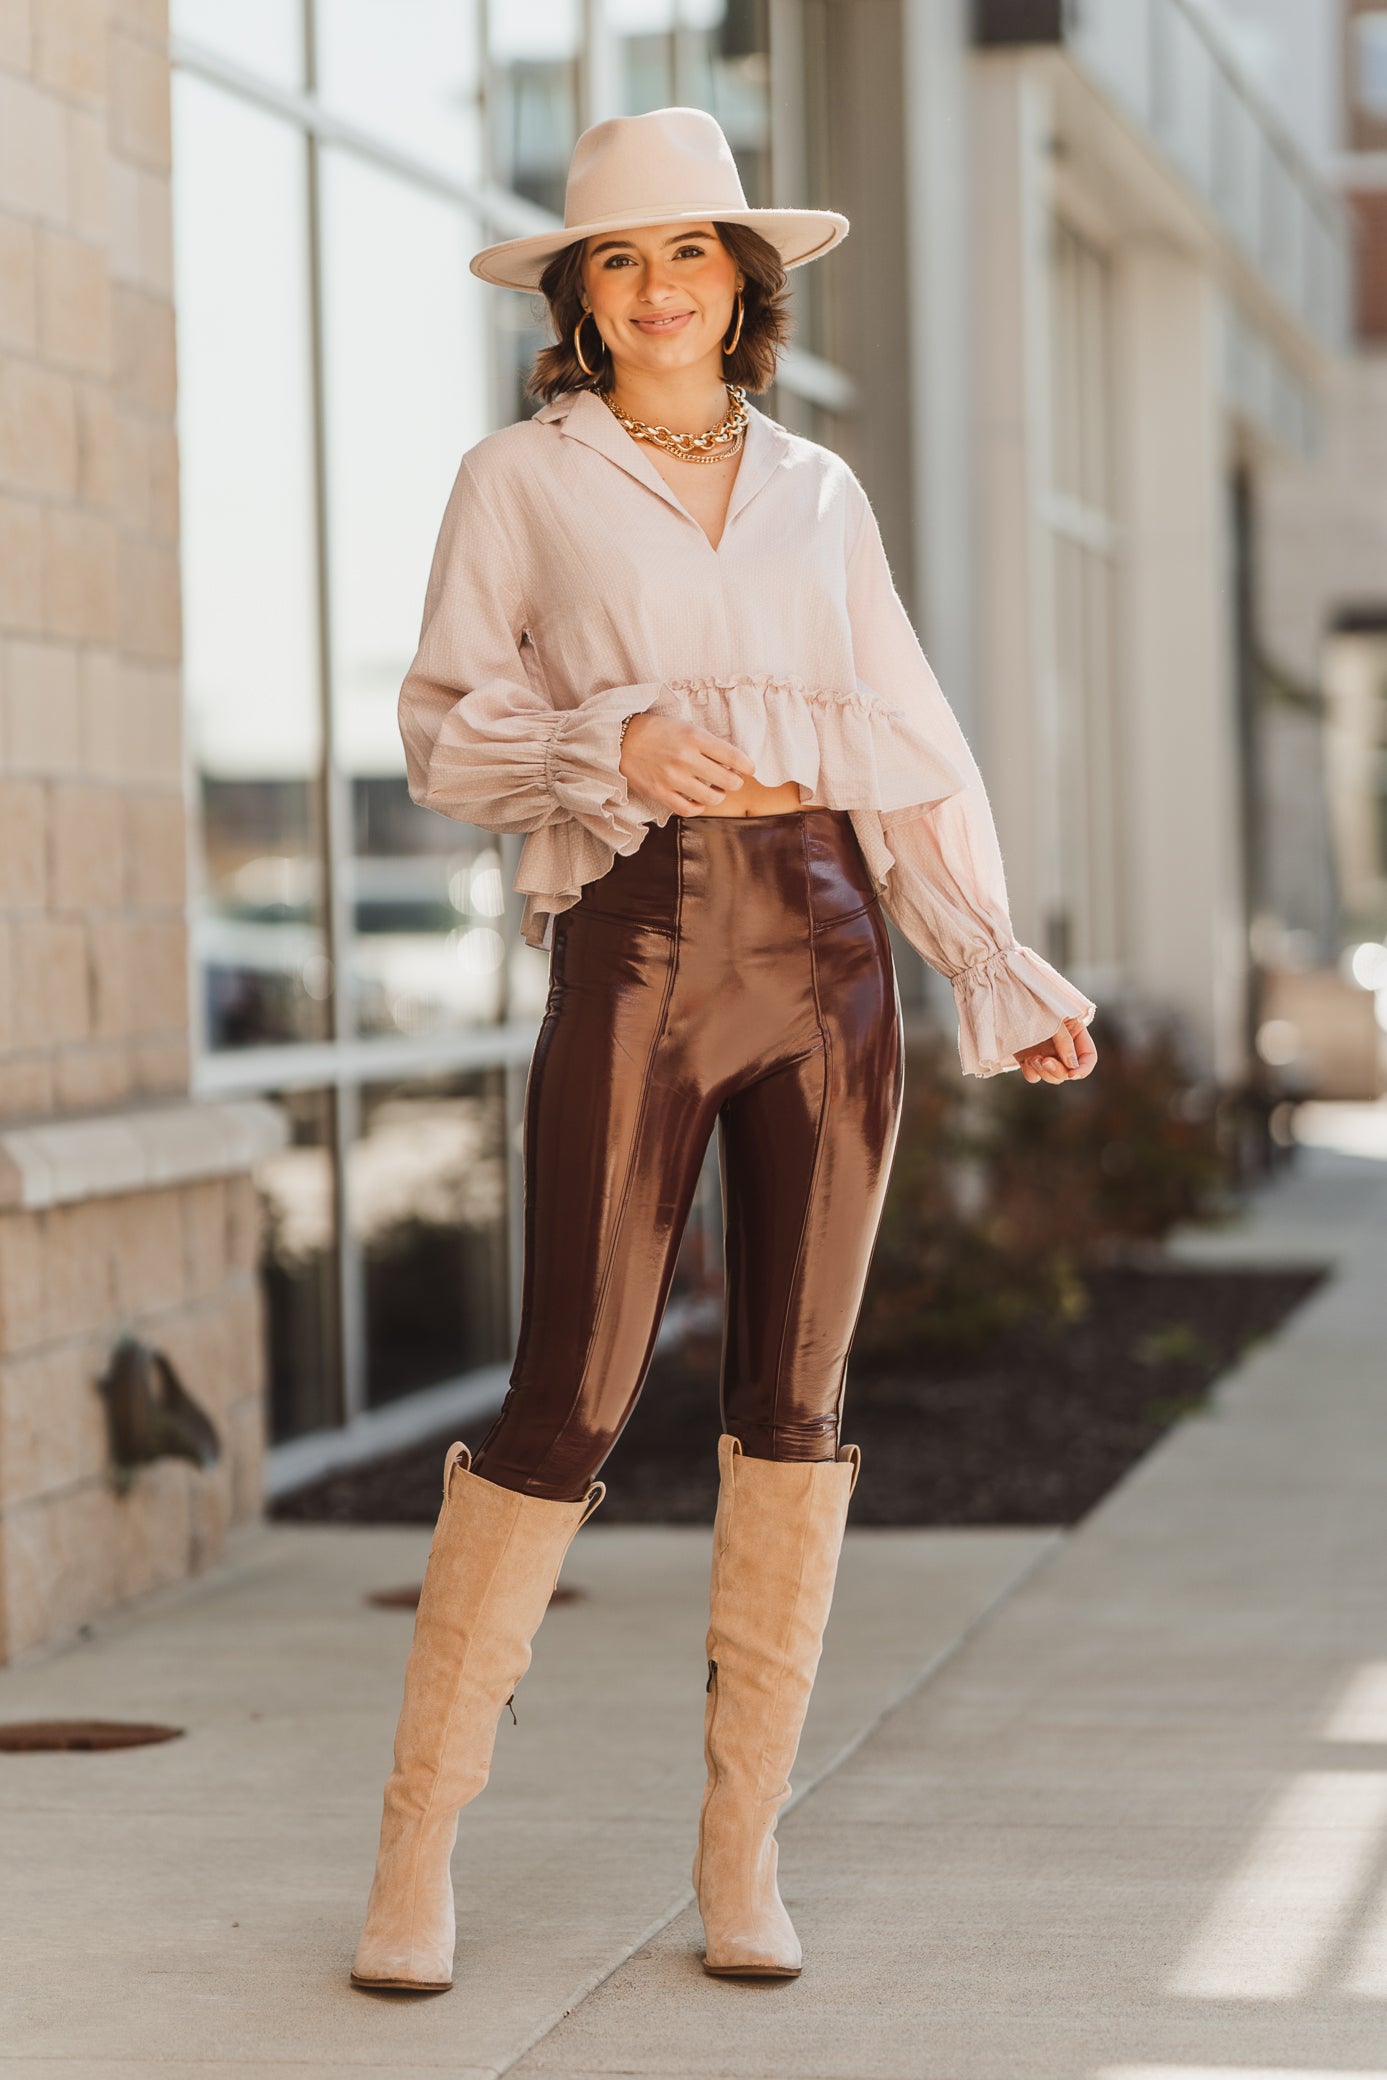 Faux Patent Leather Leggings by Spanx